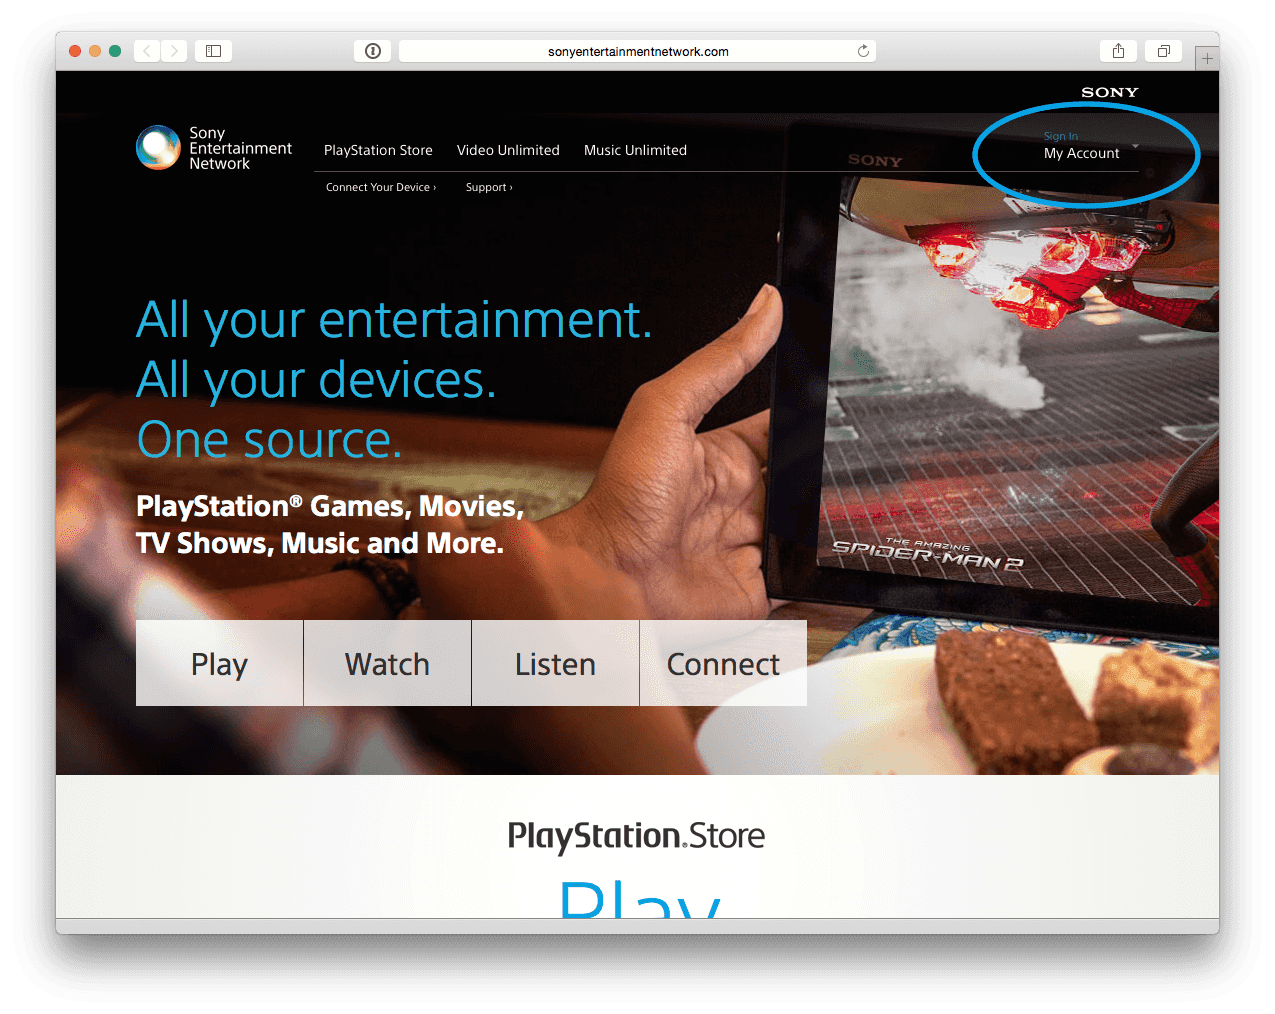 How to buy and redeem PlayStation Gift Cards and games from